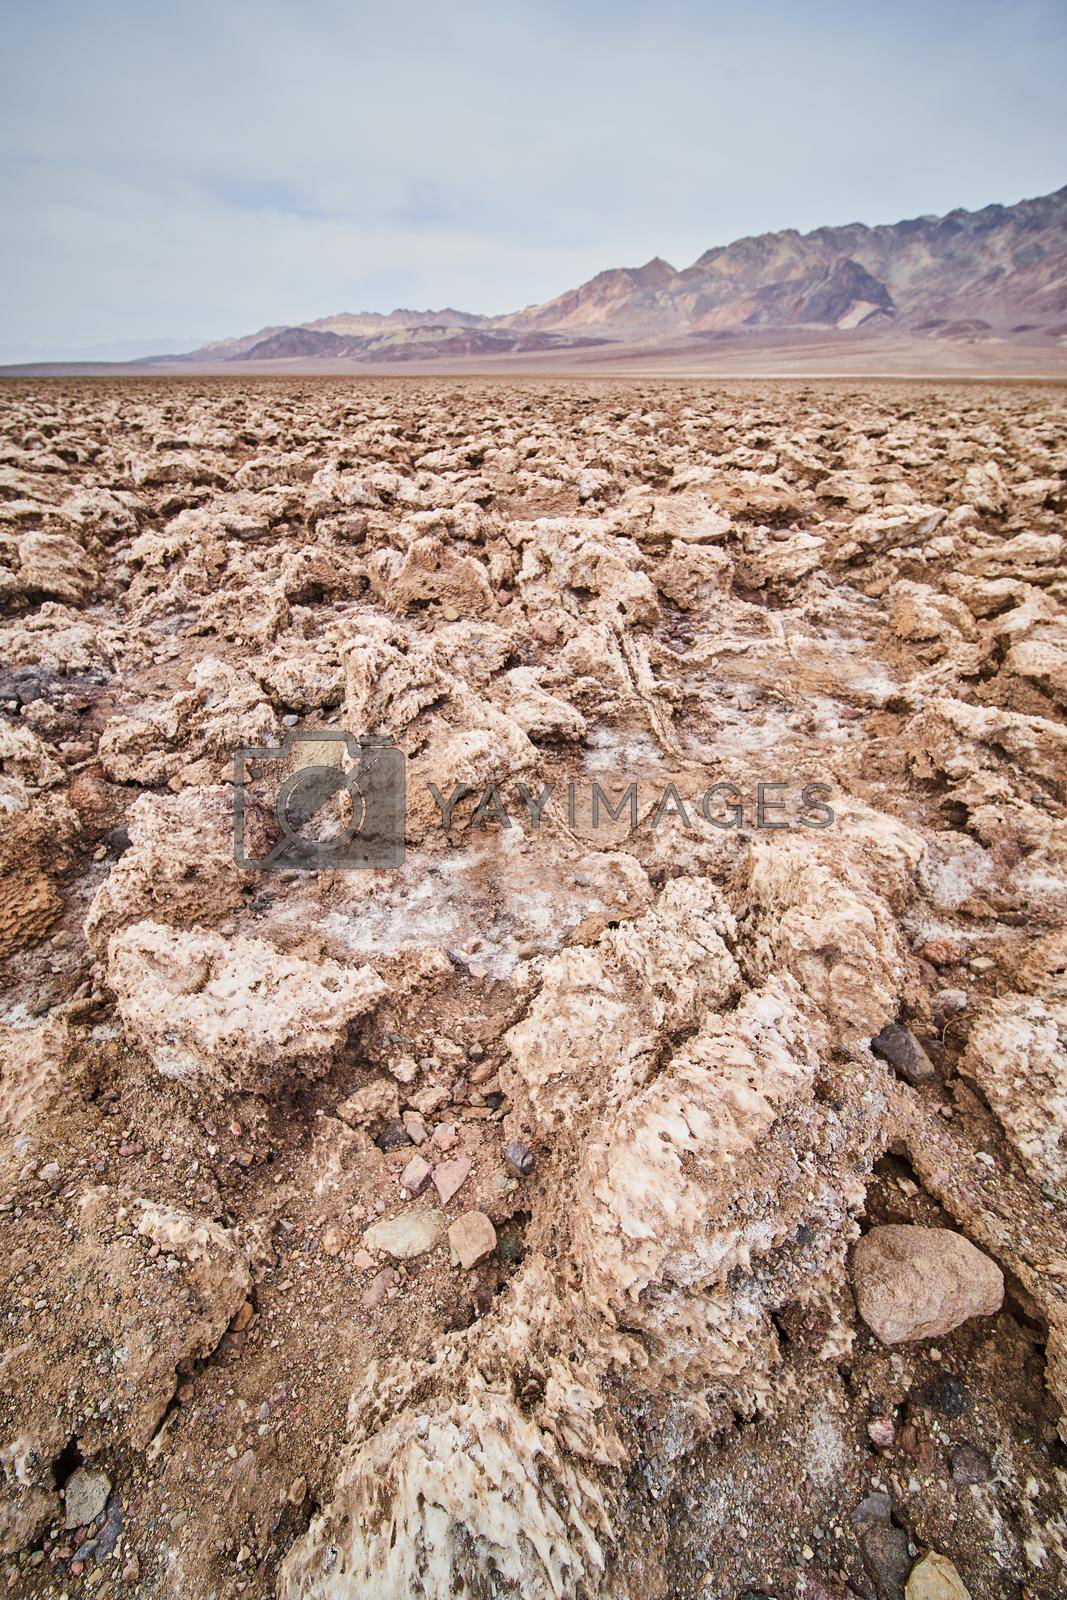 Royalty free image of Sharp eroded salt formations in Death Valley salt flats by njproductions